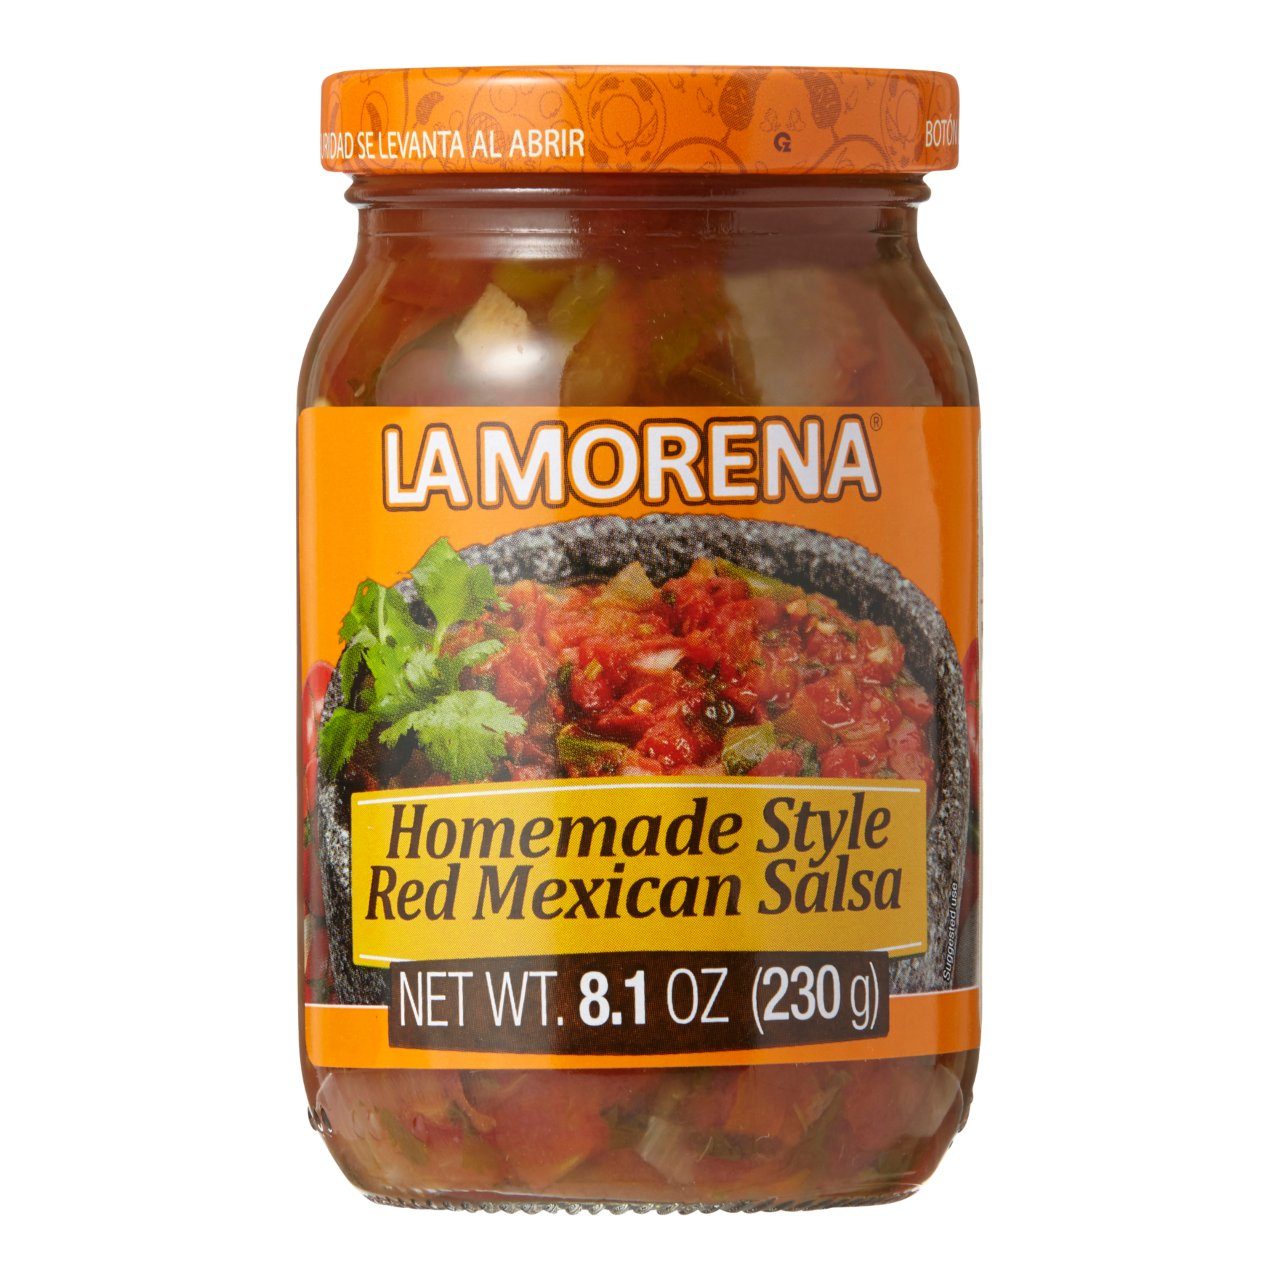 Red Mexican salsa homemade style